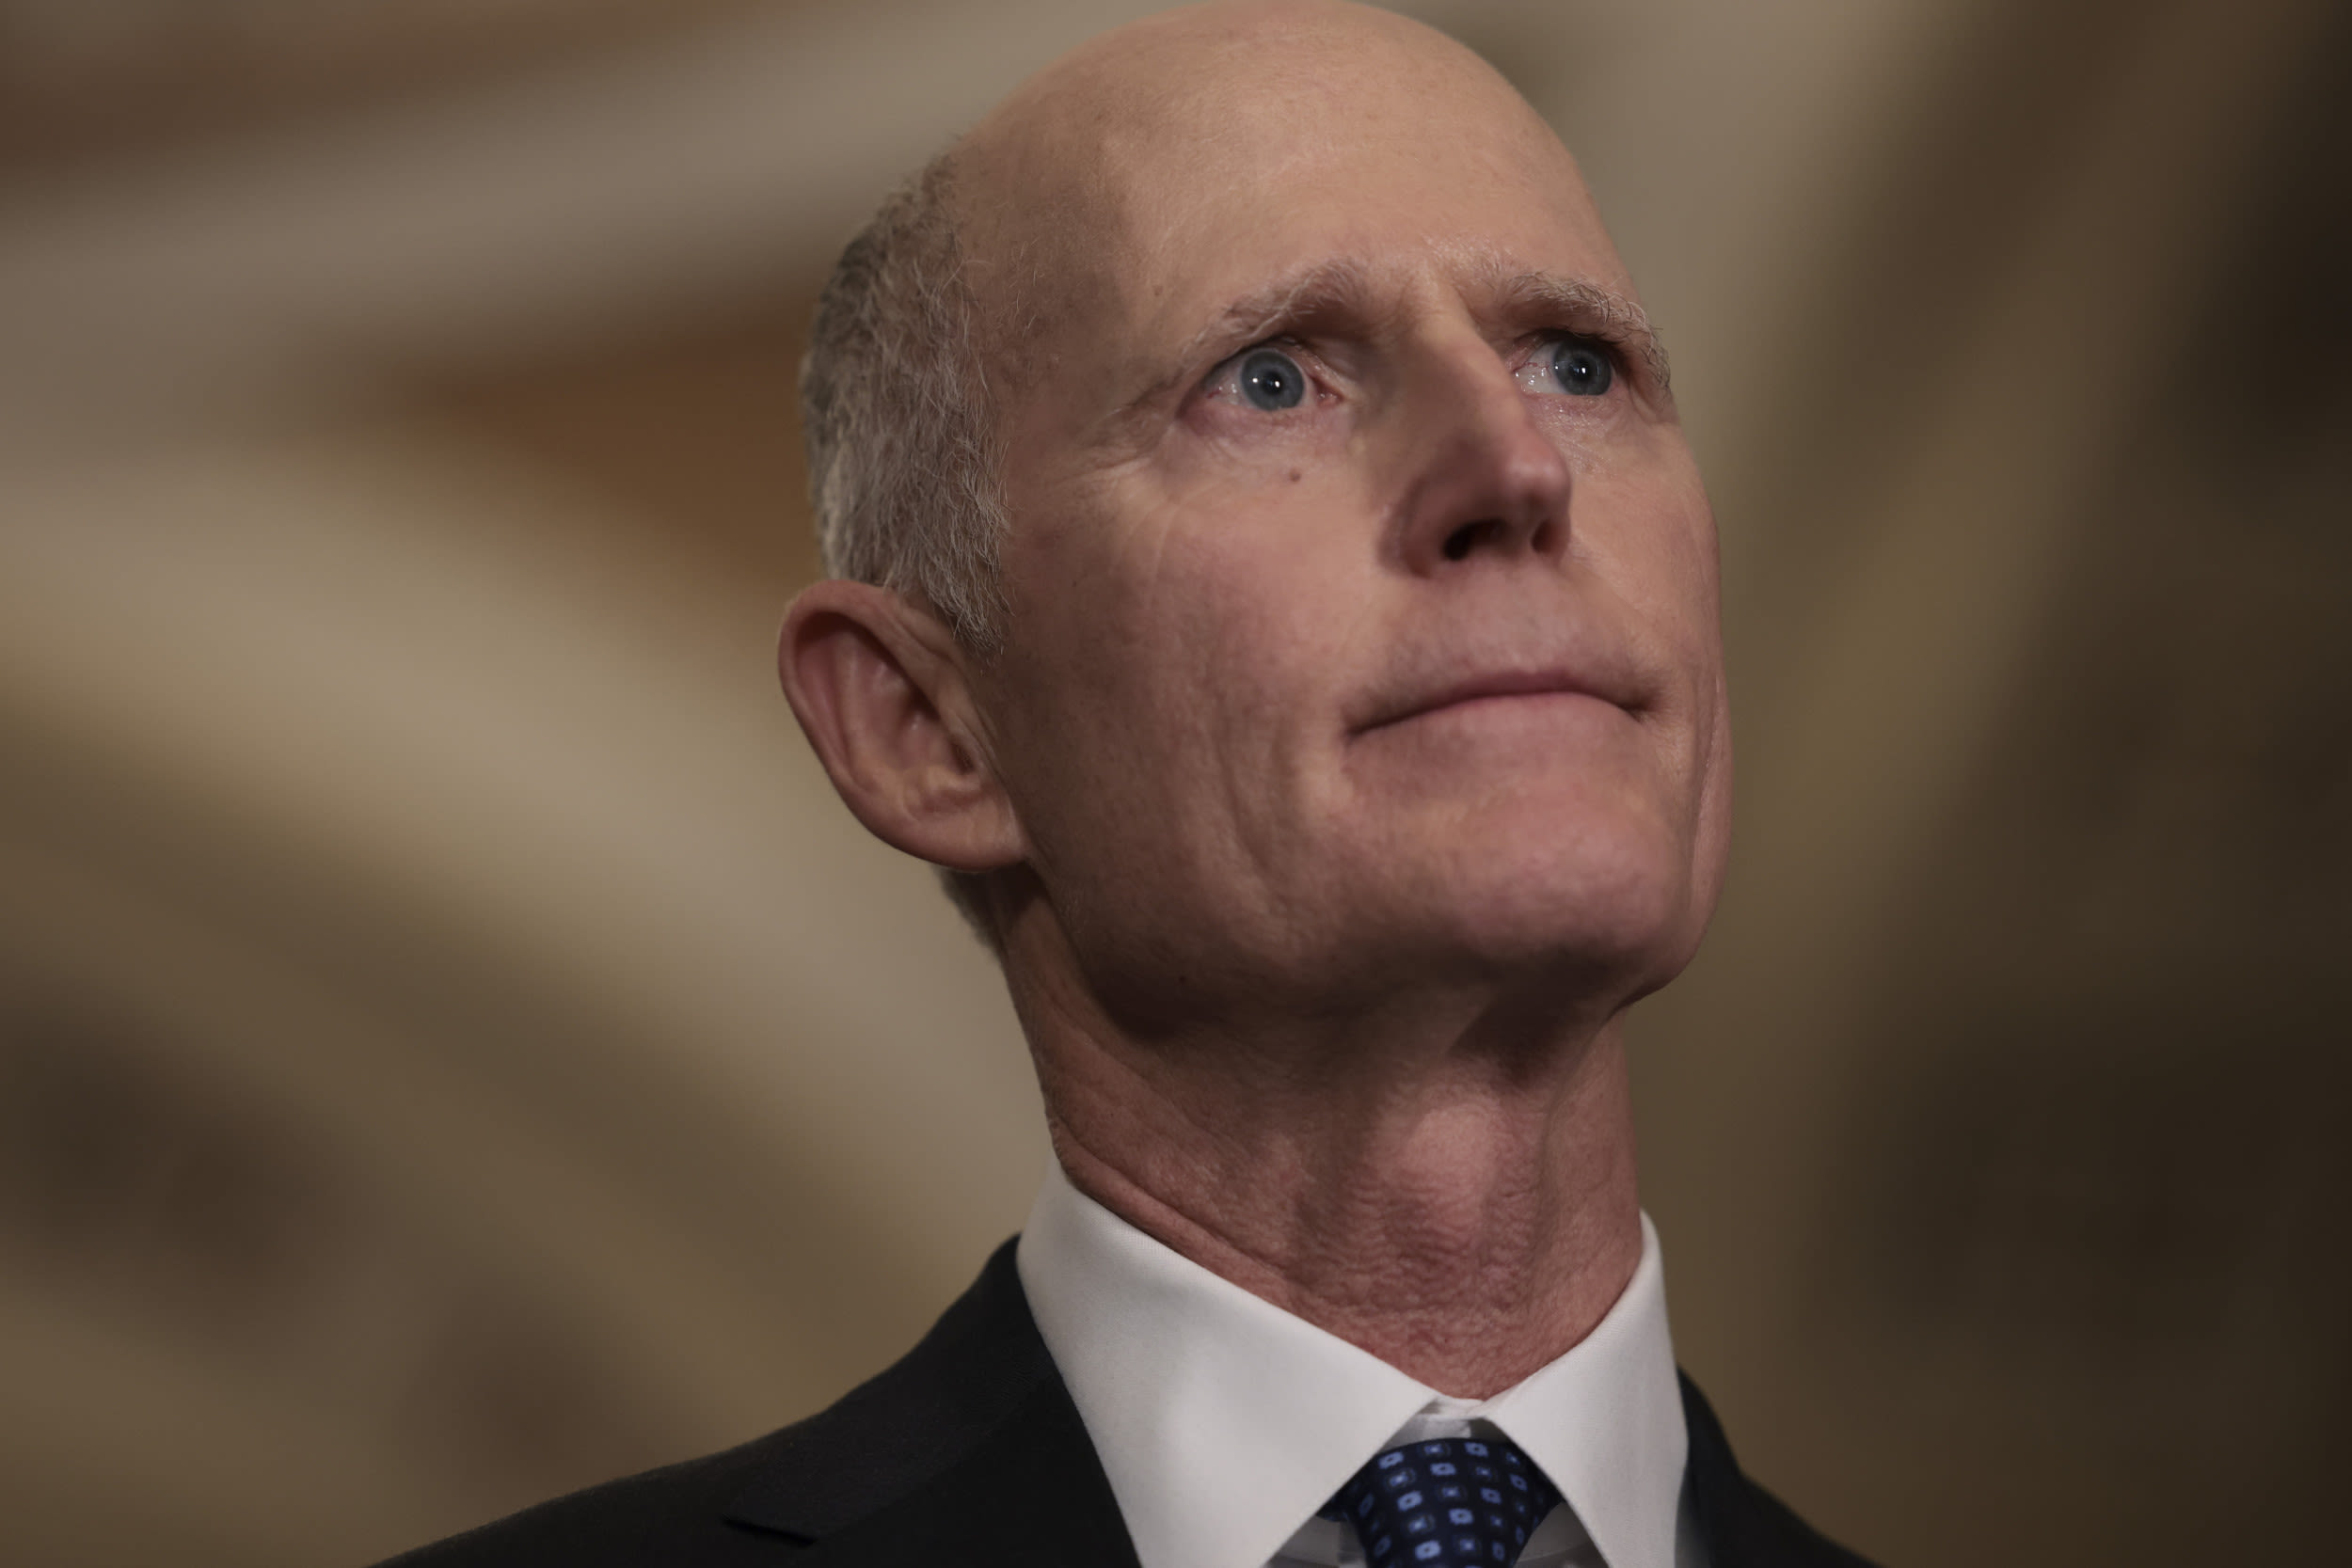 Democrats rip 'roadblock' Rick Scott for pushing back against foreign aid package